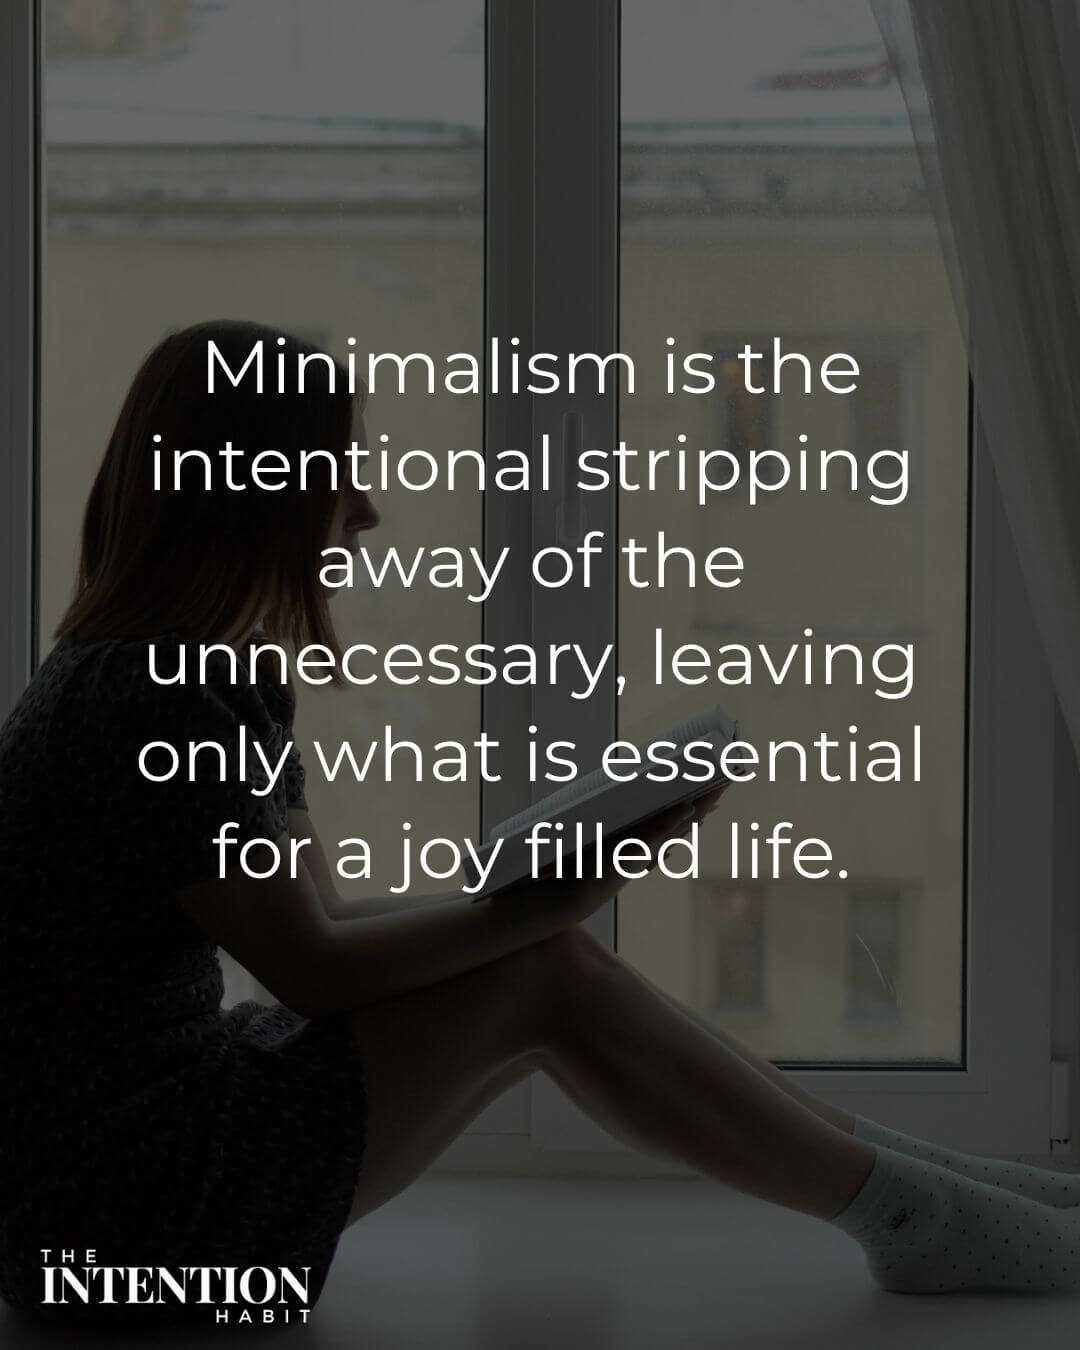 simple living quote - minimalism is the intentional stripping away of the unnecessary, leaving only what is essential for a joy filled life